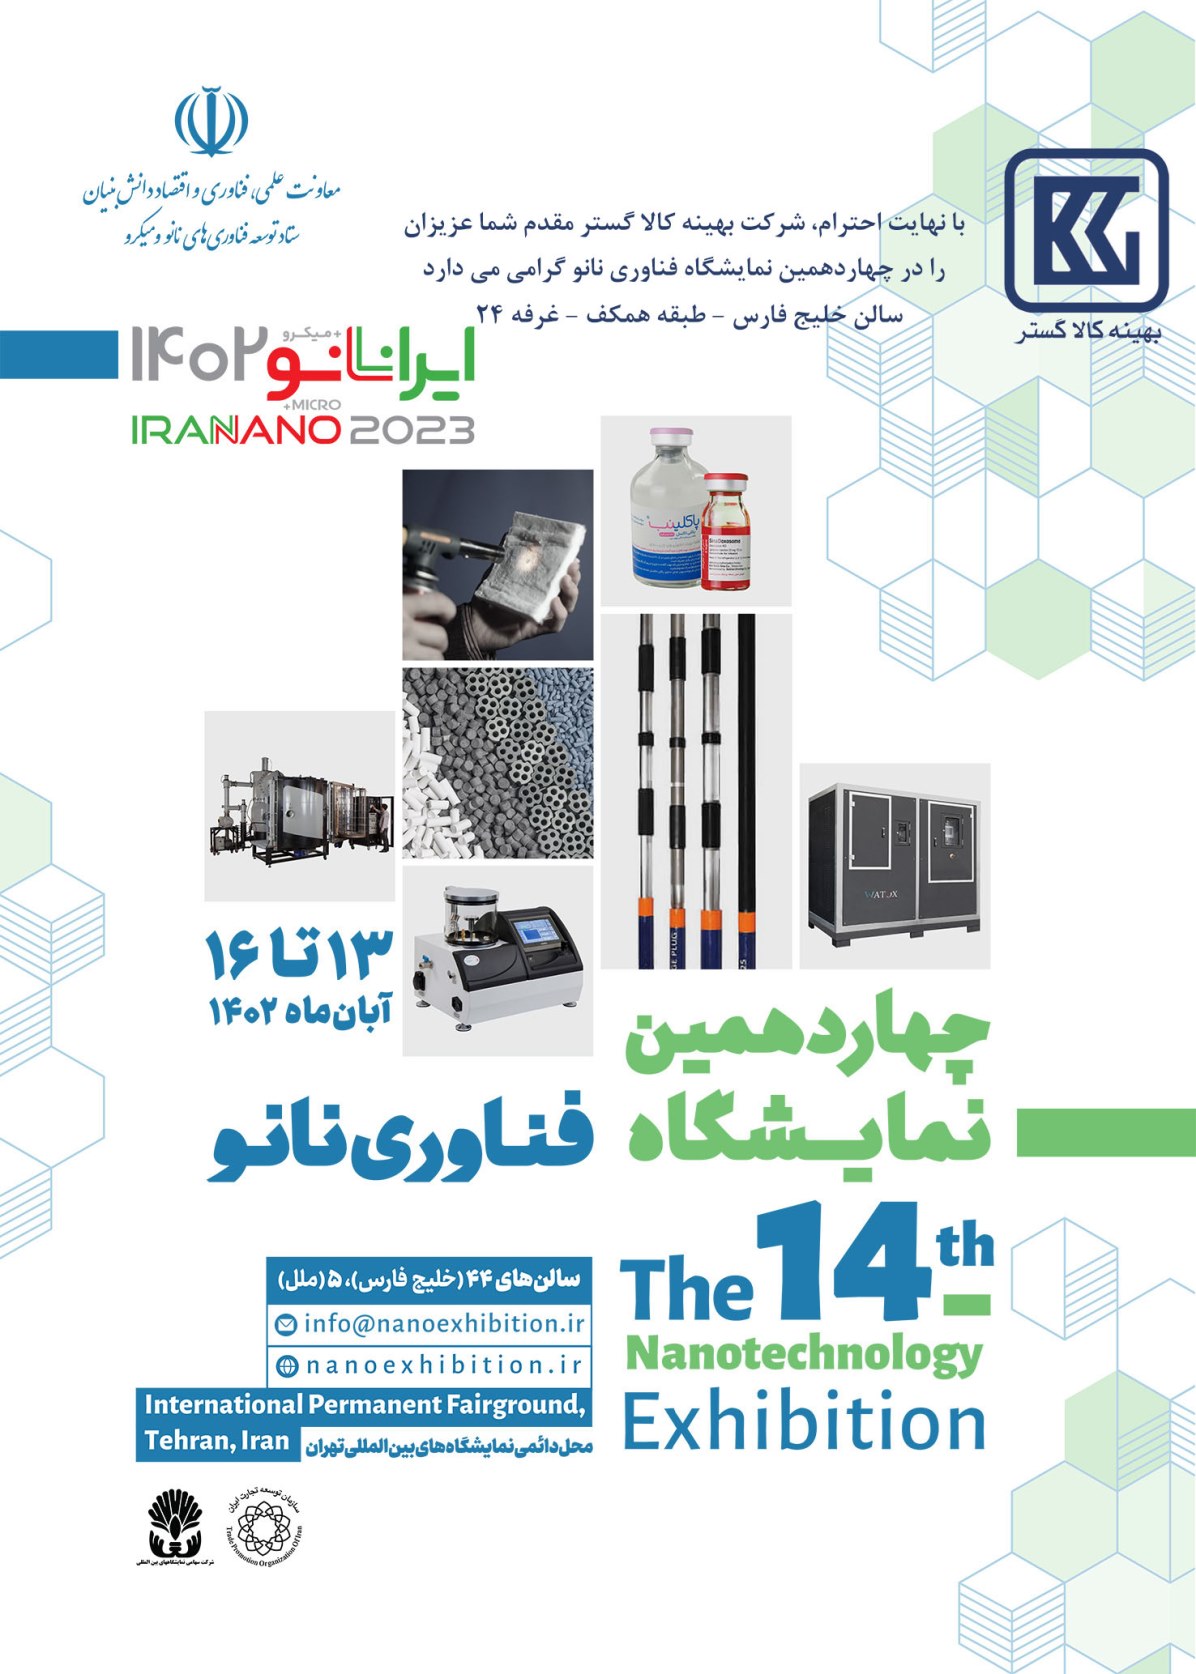 The 14 th Nanotechnology Exhibition